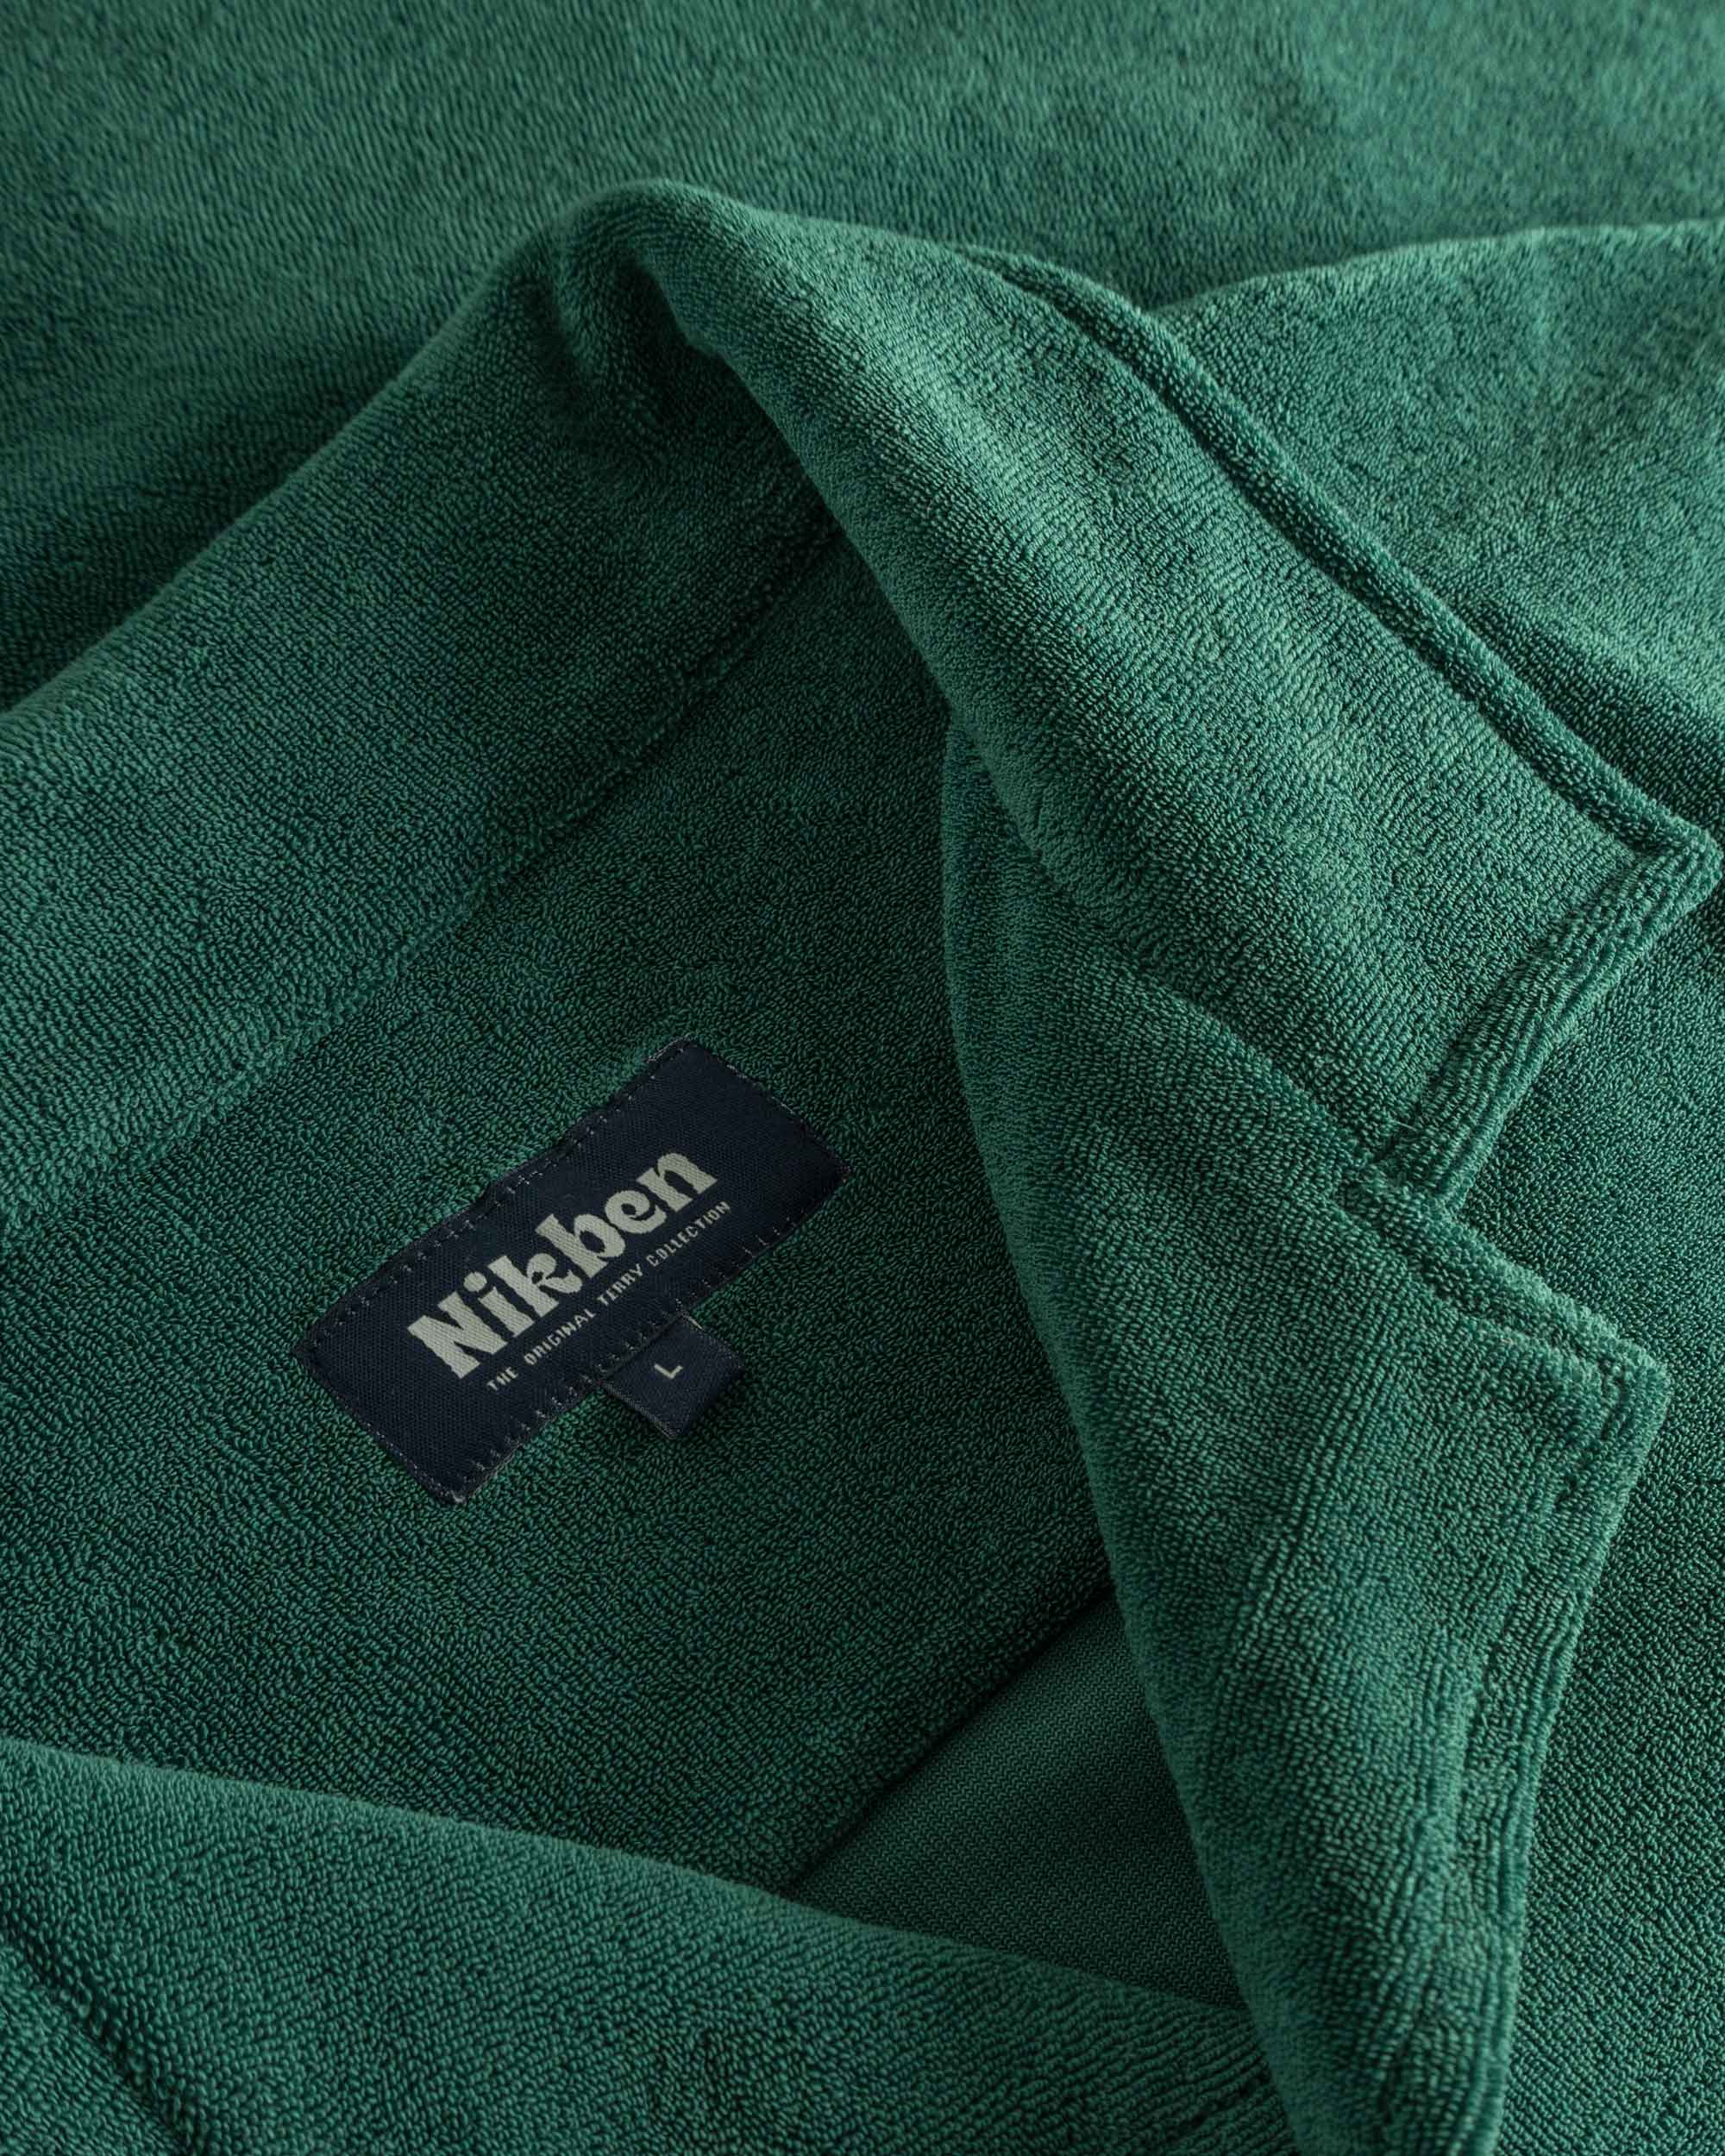 Close up of open collar and tag on a green short sleeve shirt